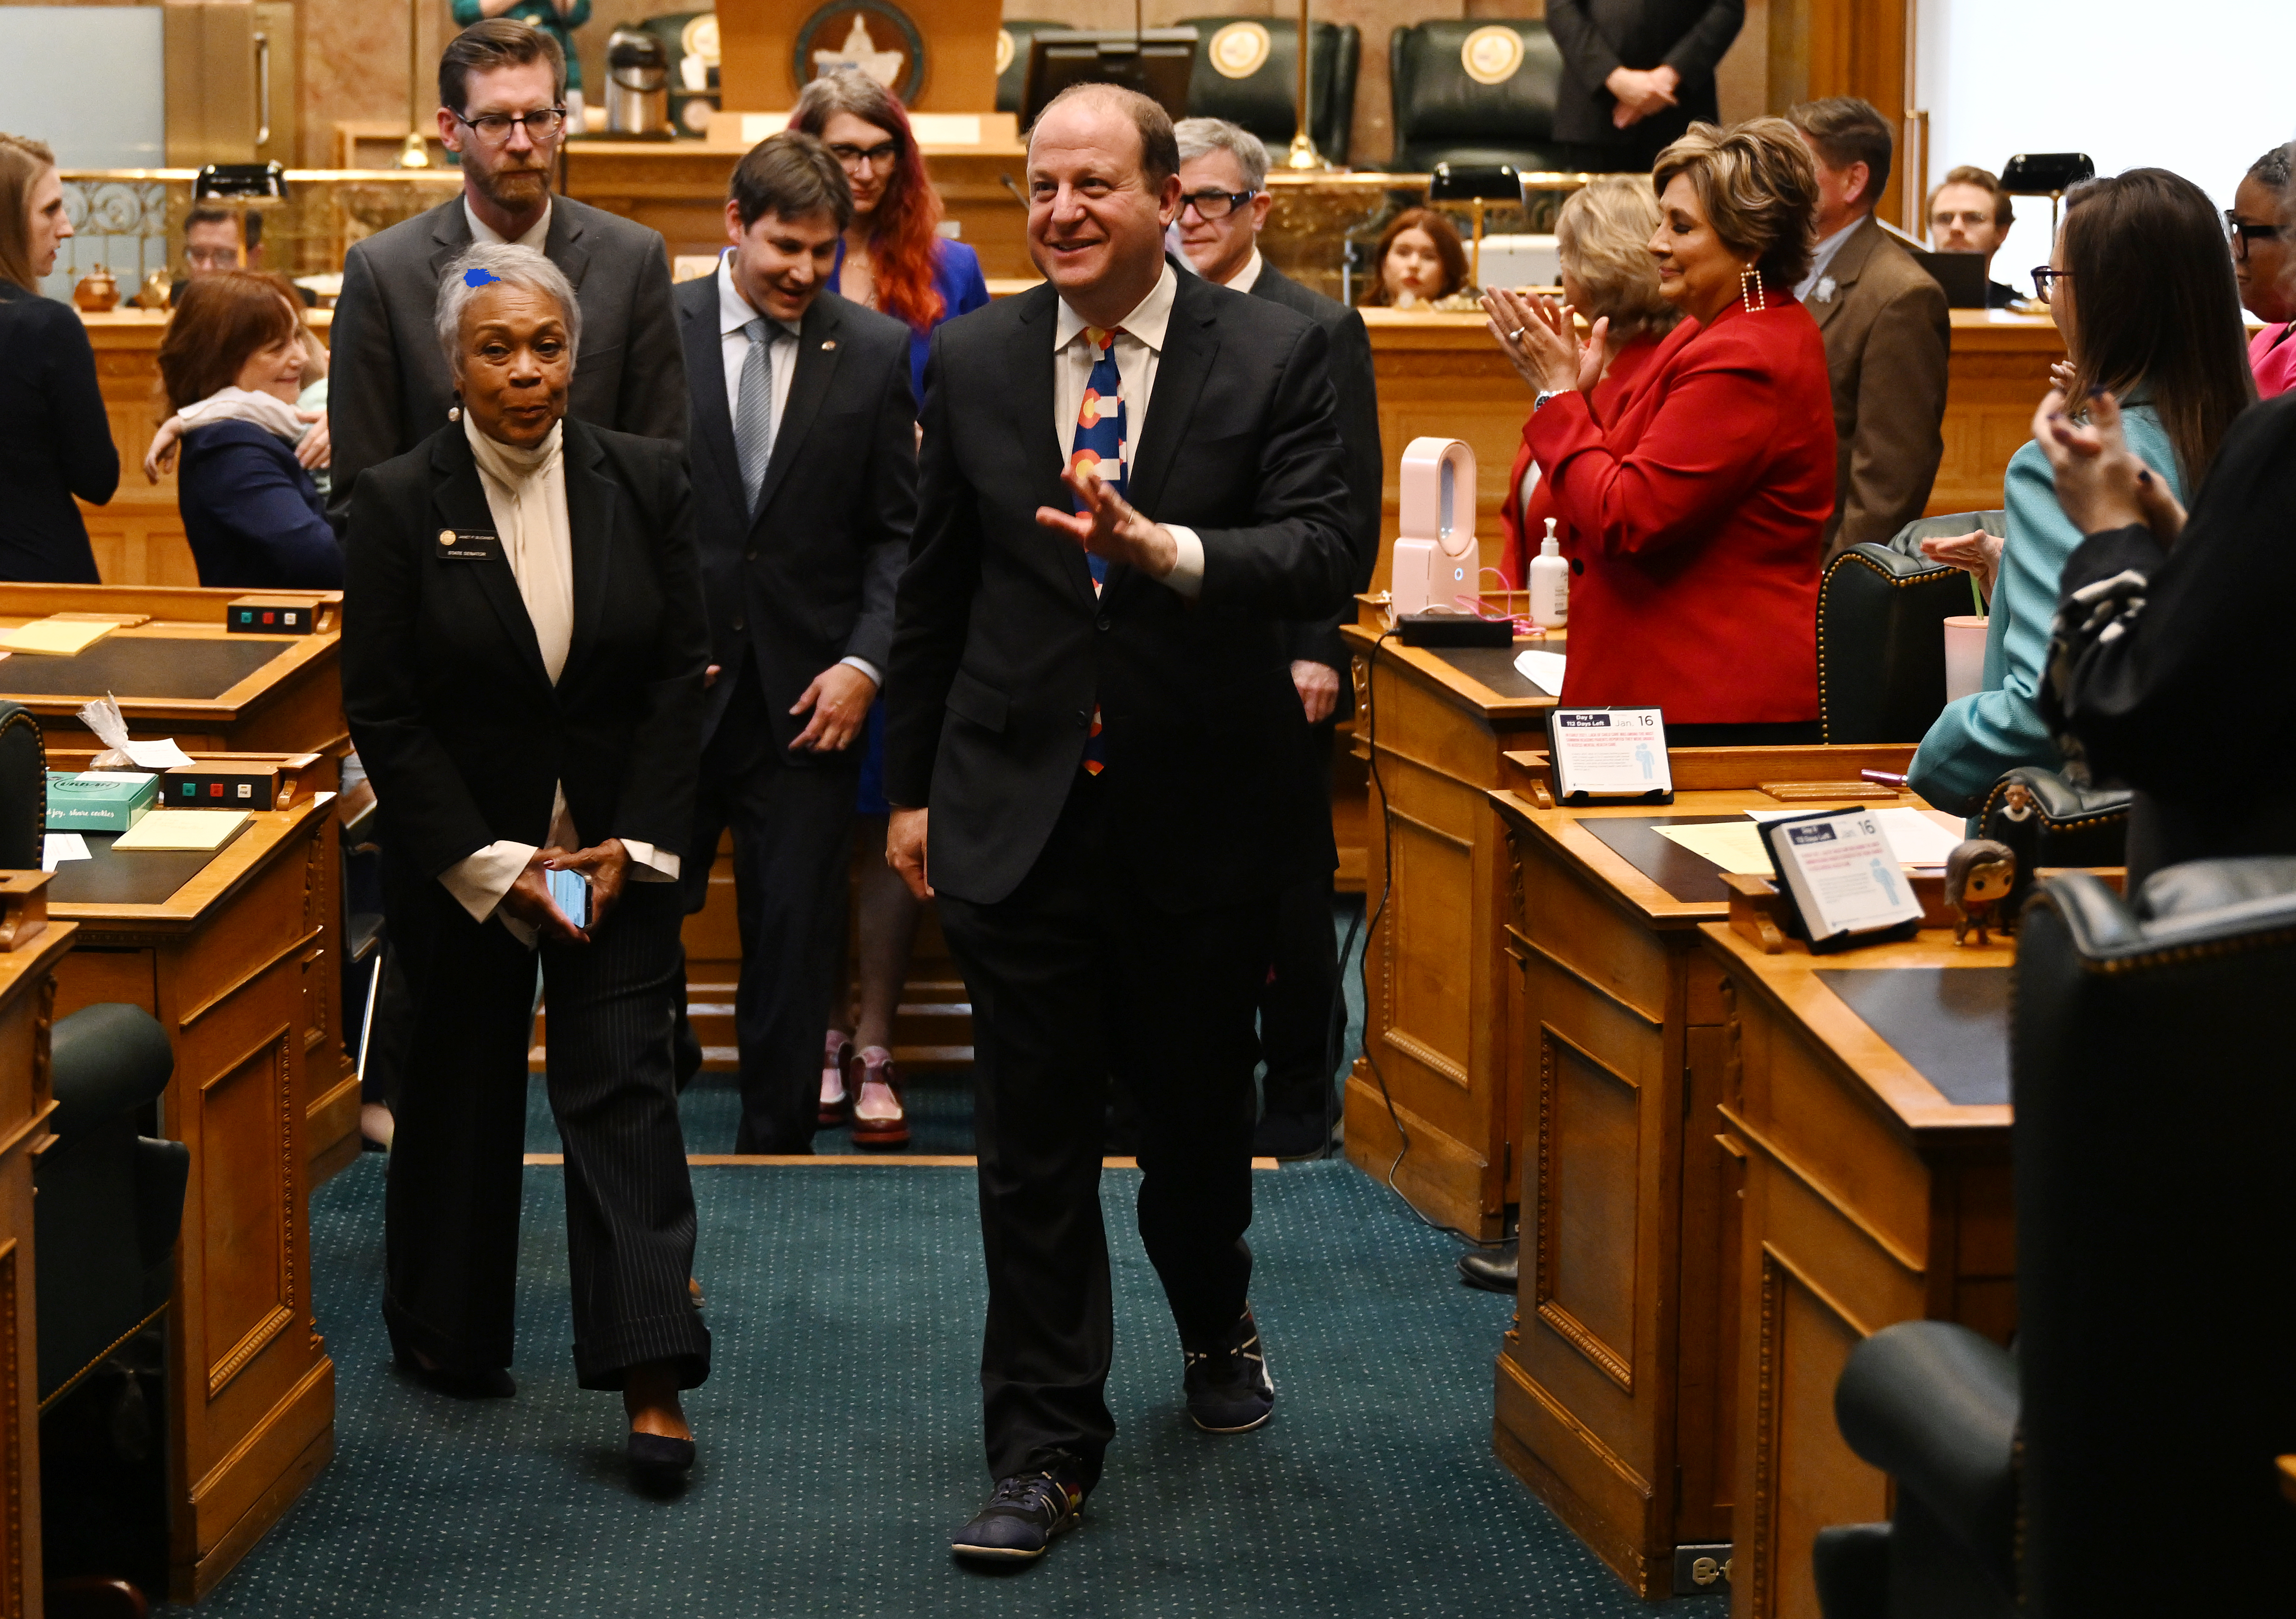 Colorado Gov. Jared Polis walks on a green carpet in the Colorado House chambers and surrounded by lawmakers while wearing a Colorado flag tie and black suit.